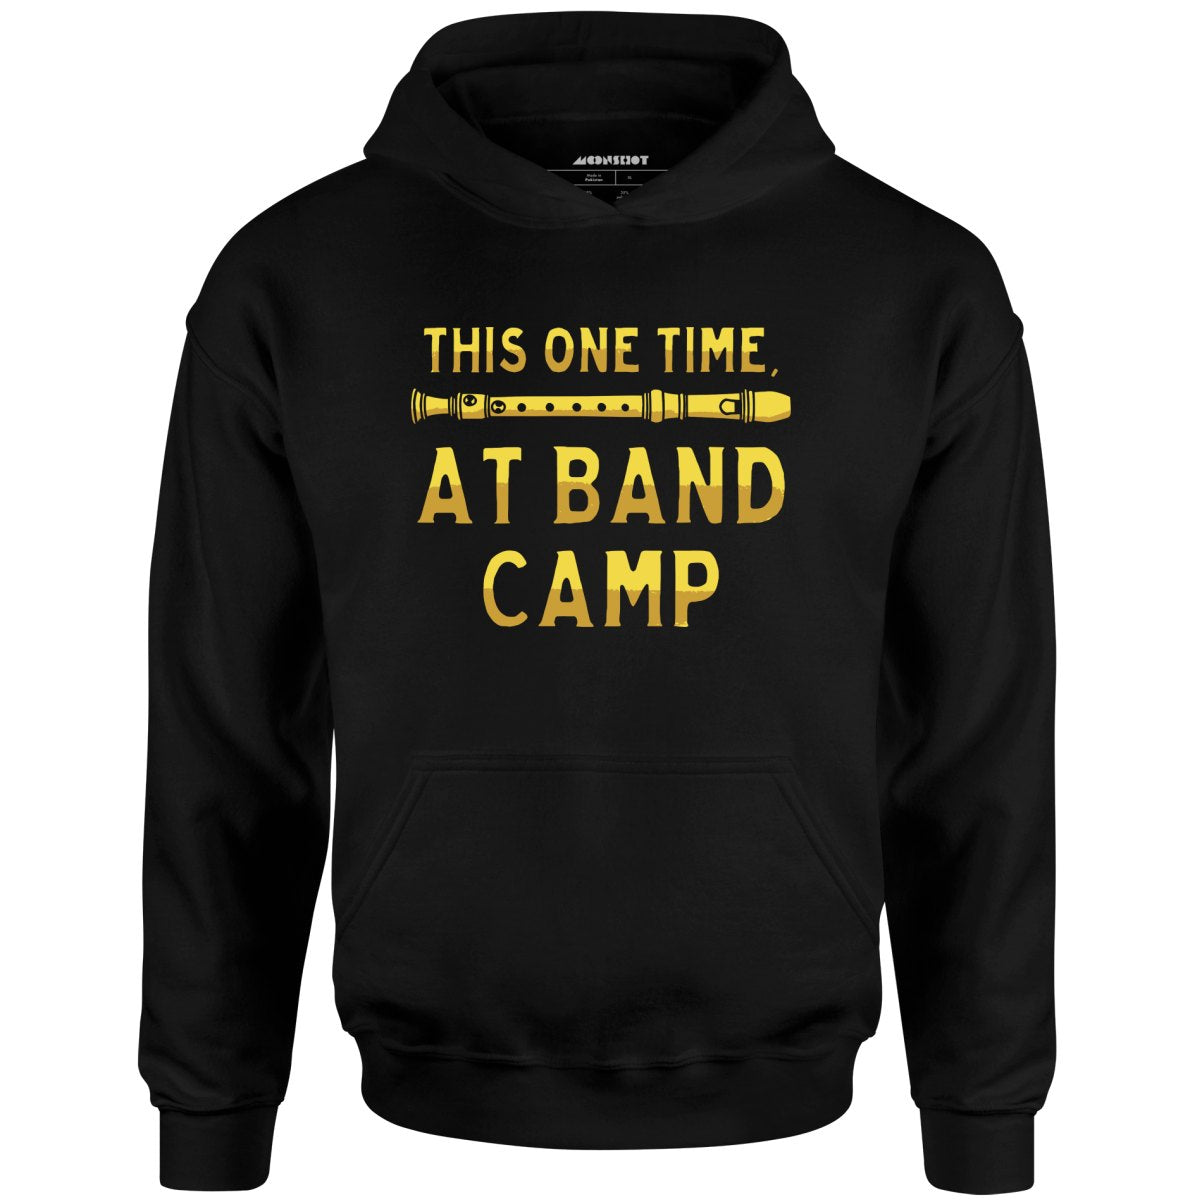 This One Time, at Band Camp - Unisex Hoodie